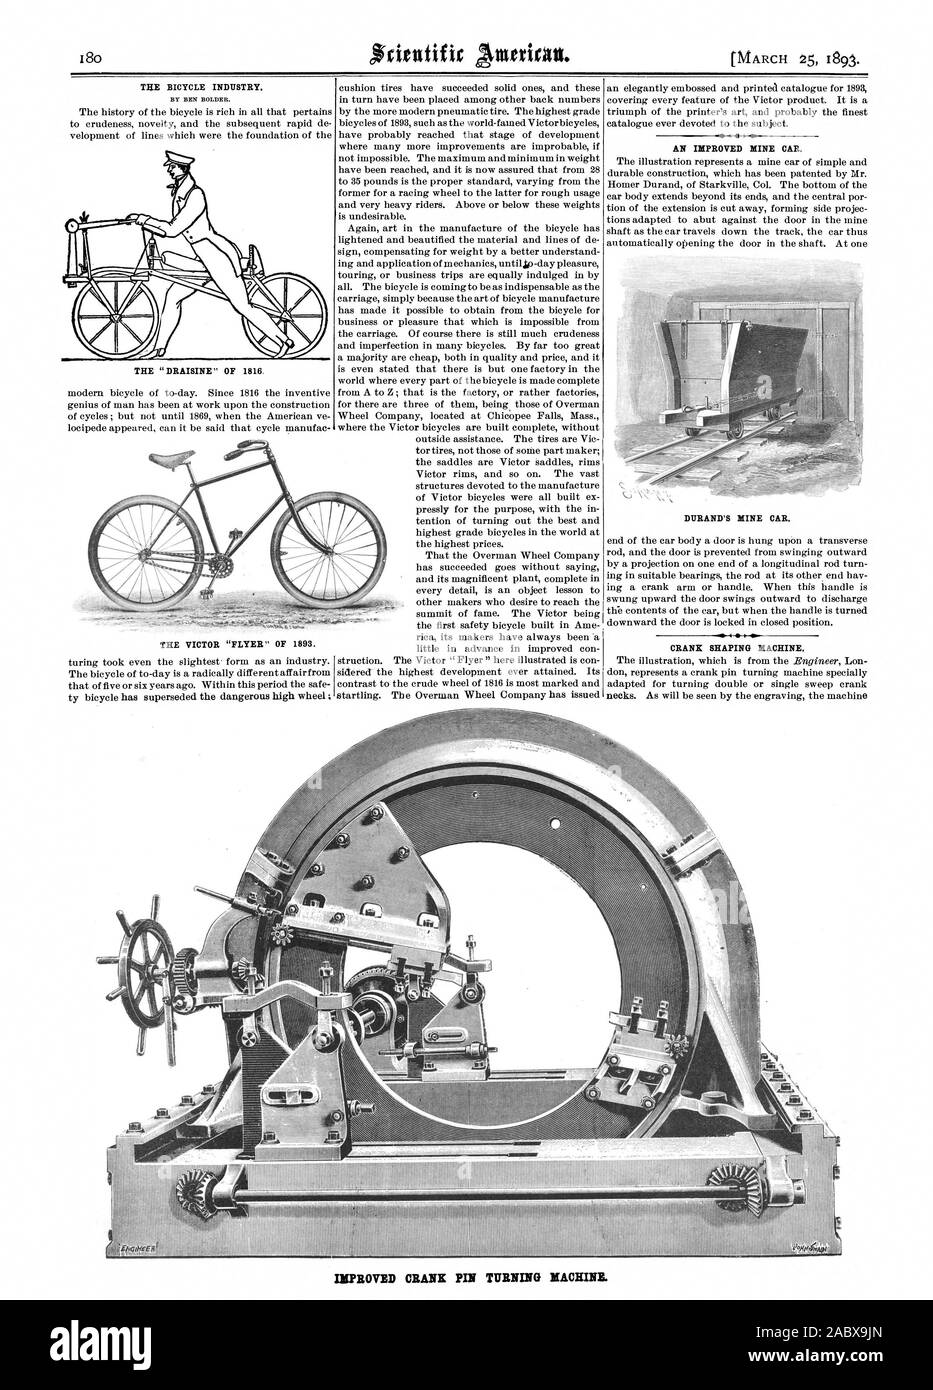 THE BICYCLE INDUSTRY. BY BEN BOLDER. THE VICTOR 'FLYER' OF 1893. CRANK SHAPING MACHINE. AN IMPROVED MINE CAR. DURAND'S MINE CAR. THE ' DRAISINE' OF 1816. IMPROVED CRANK PIN TURNING MACHINE., scientific american, 1893-03-25 Stock Photo